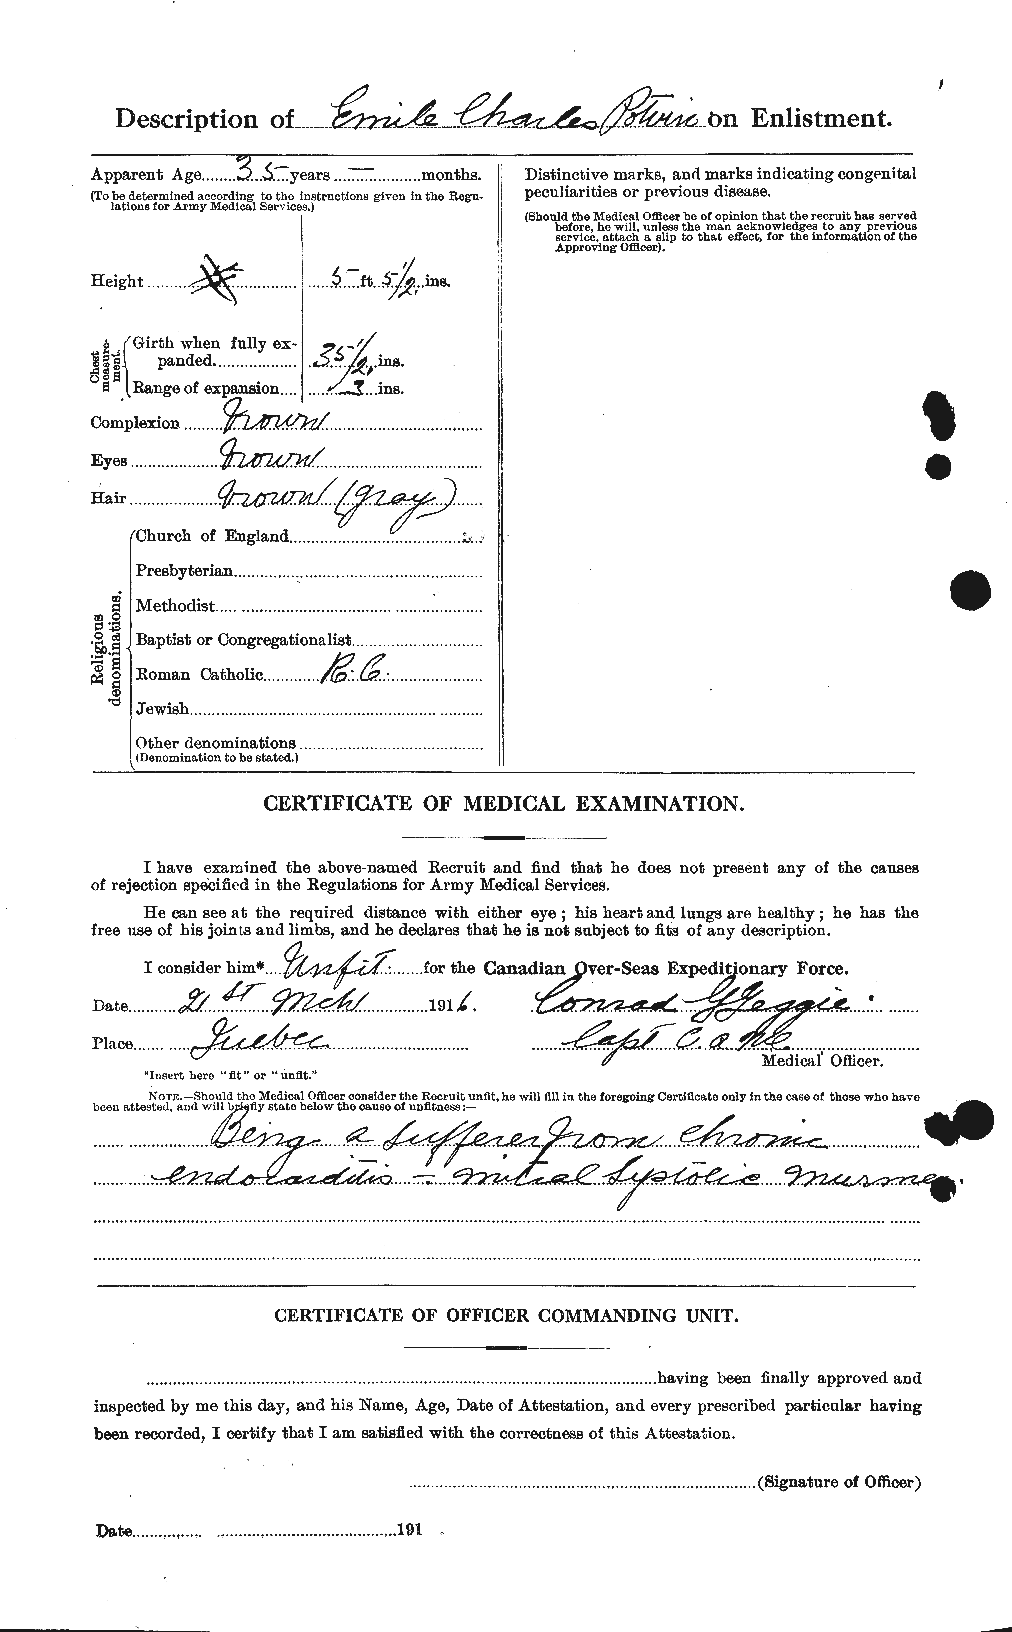 Personnel Records of the First World War - CEF 584625b